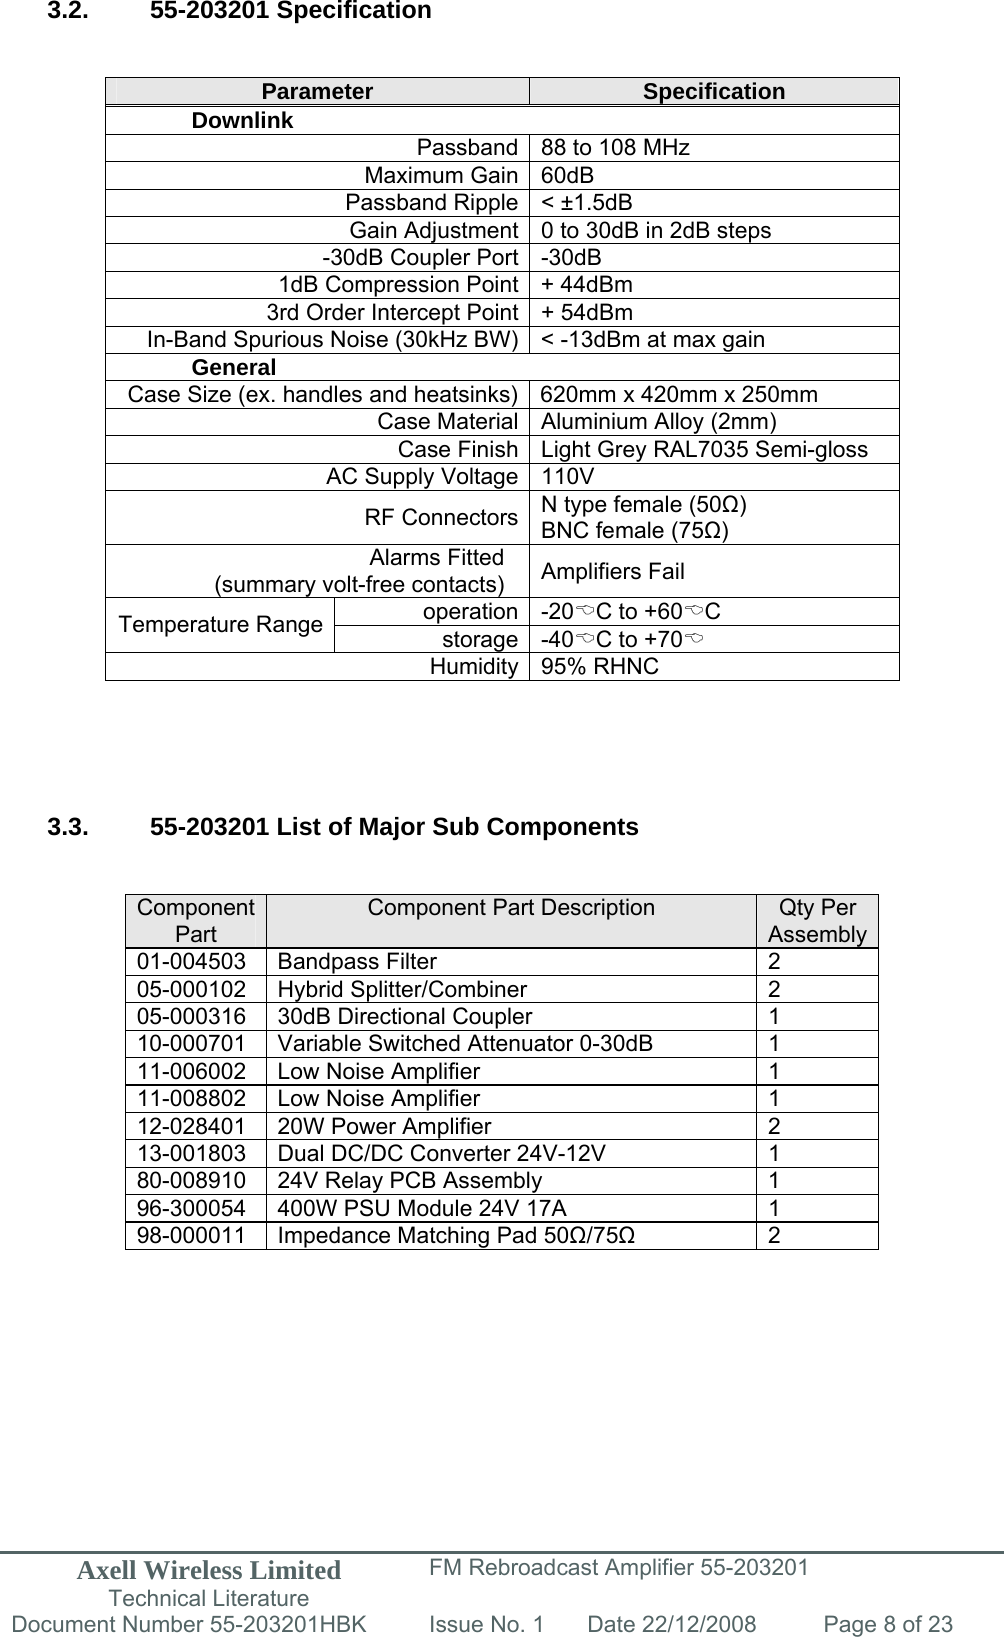 Axell Wireless Limited Technical Literature FM Rebroadcast Amplifier 55-203201 Document Number 55-203201HBK Issue No. 1  Date 22/12/2008  Page 8 of 23   3.2. 55-203201 Specification   Parameter  Specification  Downlink Passband 88 to 108 MHz Maximum Gain 60dB Passband Ripple &lt; ±1.5dB Gain Adjustment 0 to 30dB in 2dB steps -30dB Coupler Port -30dB 1dB Compression Point + 44dBm 3rd Order Intercept Point + 54dBm In-Band Spurious Noise (30kHz BW) &lt; -13dBm at max gain  General Case Size (ex. handles and heatsinks) 620mm x 420mm x 250mm Case Material Aluminium Alloy (2mm) Case Finish Light Grey RAL7035 Semi-gloss AC Supply Voltage 110V RF Connectors N type female (50) BNC female (75) Alarms Fitted (summary volt-free contacts)  Amplifiers Fail operation -20%C to +60%C Temperature Range  storage -40%C to +70% Humidity 95% RHNC      3.3.  55-203201 List of Major Sub Components   Component Part Component Part Description  Qty Per Assembly 01-004503 Bandpass Filter  2 05-000102 Hybrid Splitter/Combiner  2 05-000316  30dB Directional Coupler  1 10-000701  Variable Switched Attenuator 0-30dB  1 11-006002  Low Noise Amplifier  1 11-008802  Low Noise Amplifier  1 12-028401  20W Power Amplifier  2 13-001803  Dual DC/DC Converter 24V-12V  1 80-008910  24V Relay PCB Assembly  1 96-300054  400W PSU Module 24V 17A  1 98-000011  Impedance Matching Pad 50/75 2          